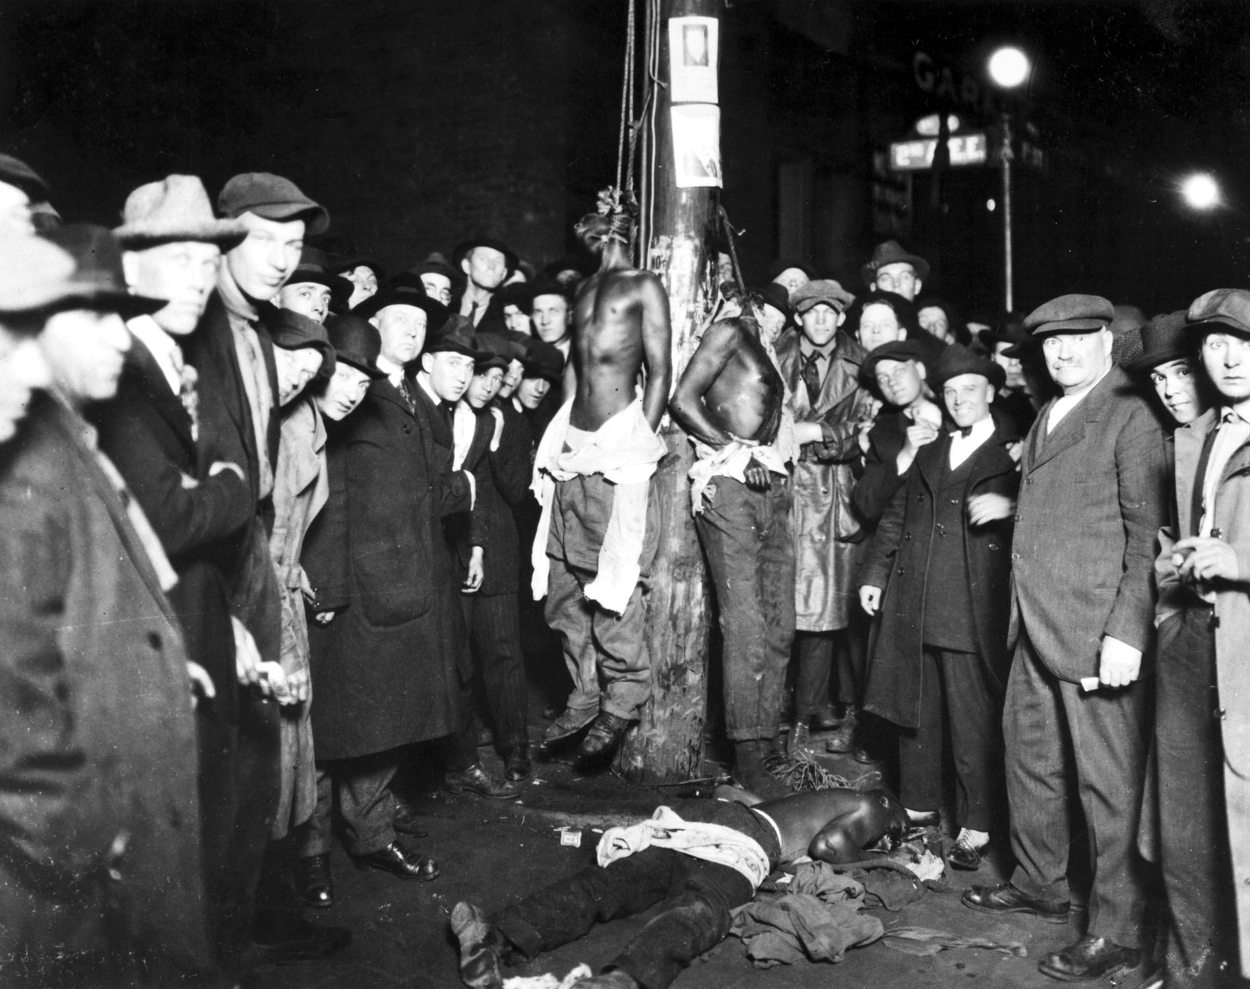 Duluth Lynching Post Card - American whites Lynched Several African Americans in the name of this white God.